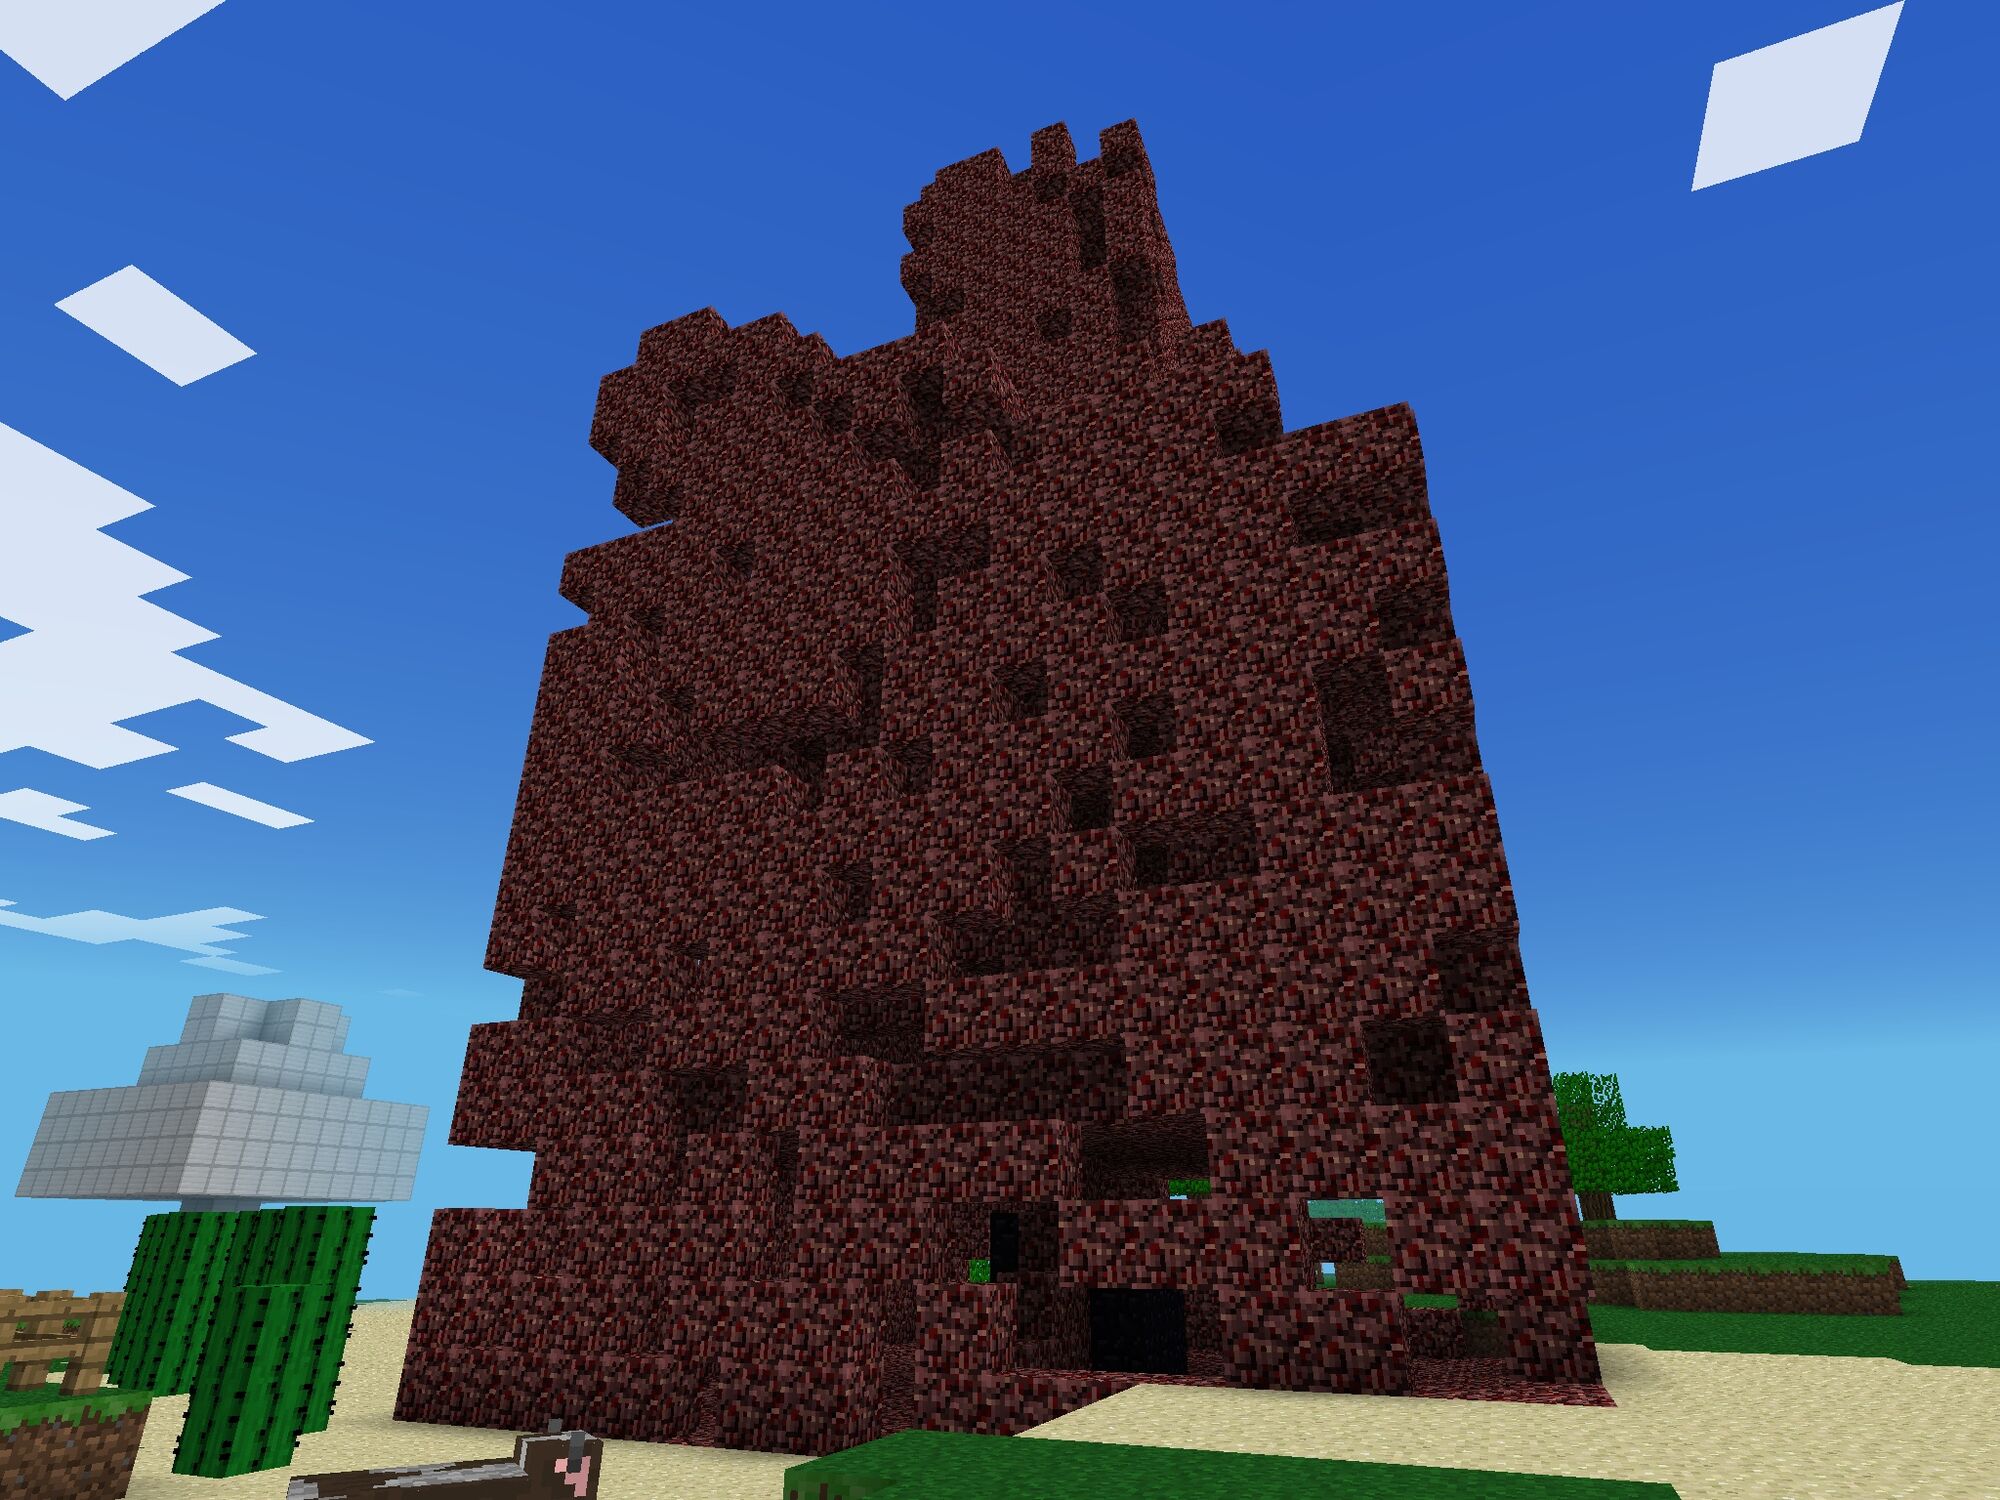 What is a nether spire?